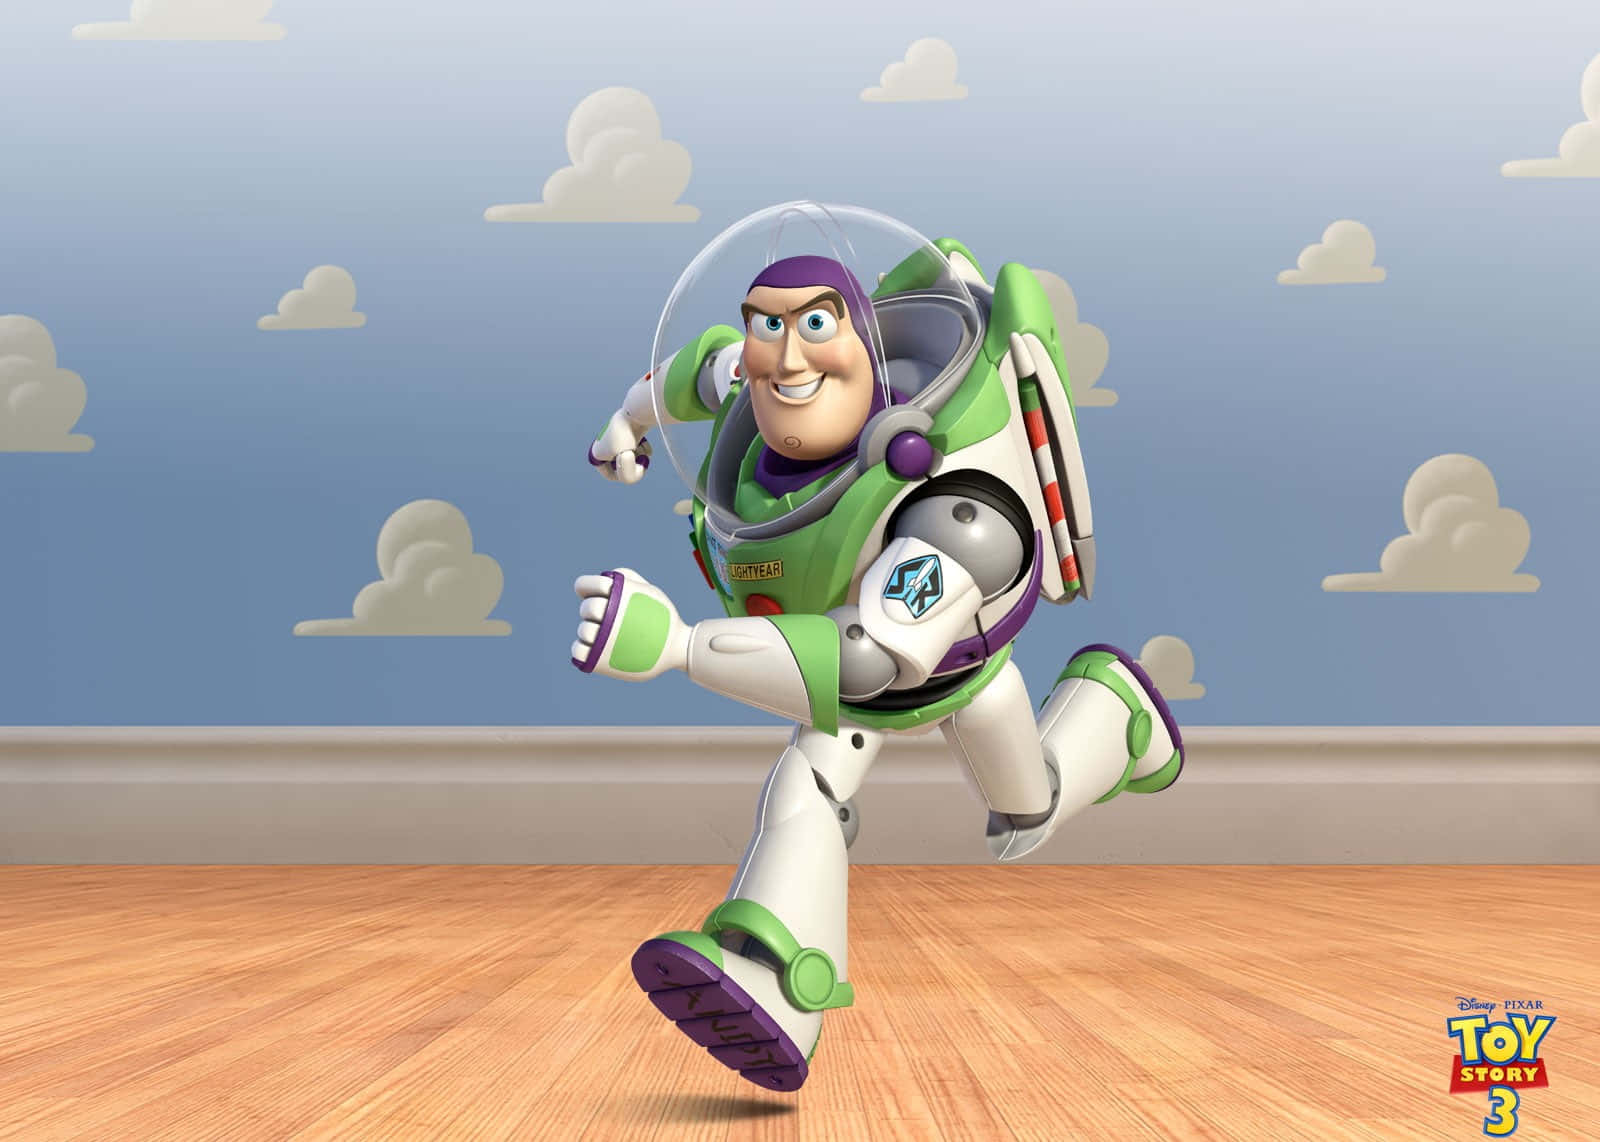 Buzz Lightyear Against A Toy Story Cloud Wallpaper